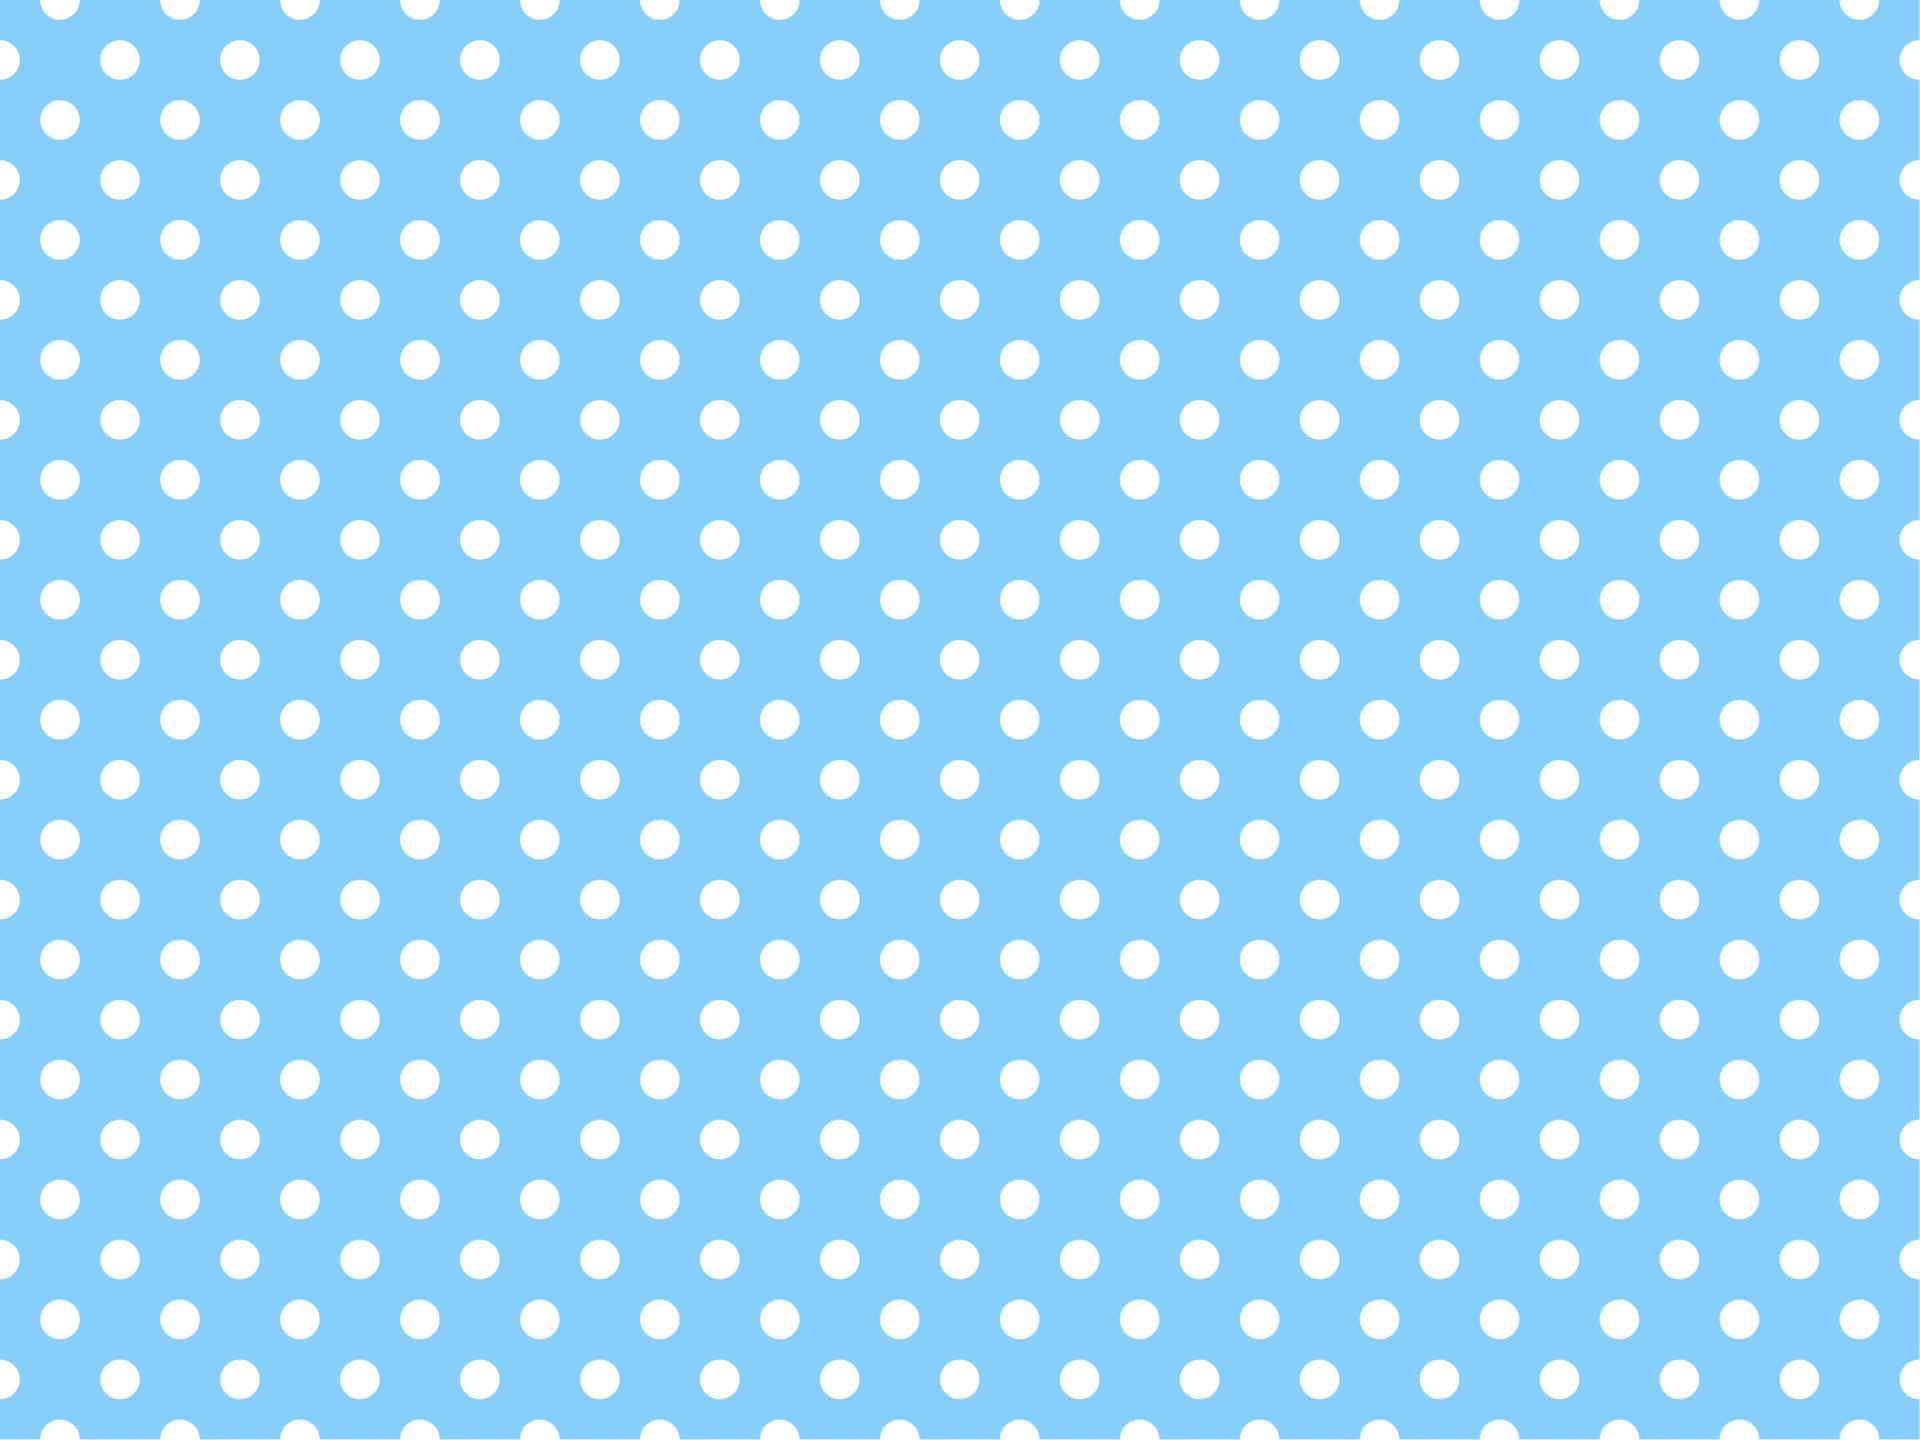 6. Sky Blue and White Polka Dot Nails - wide 6